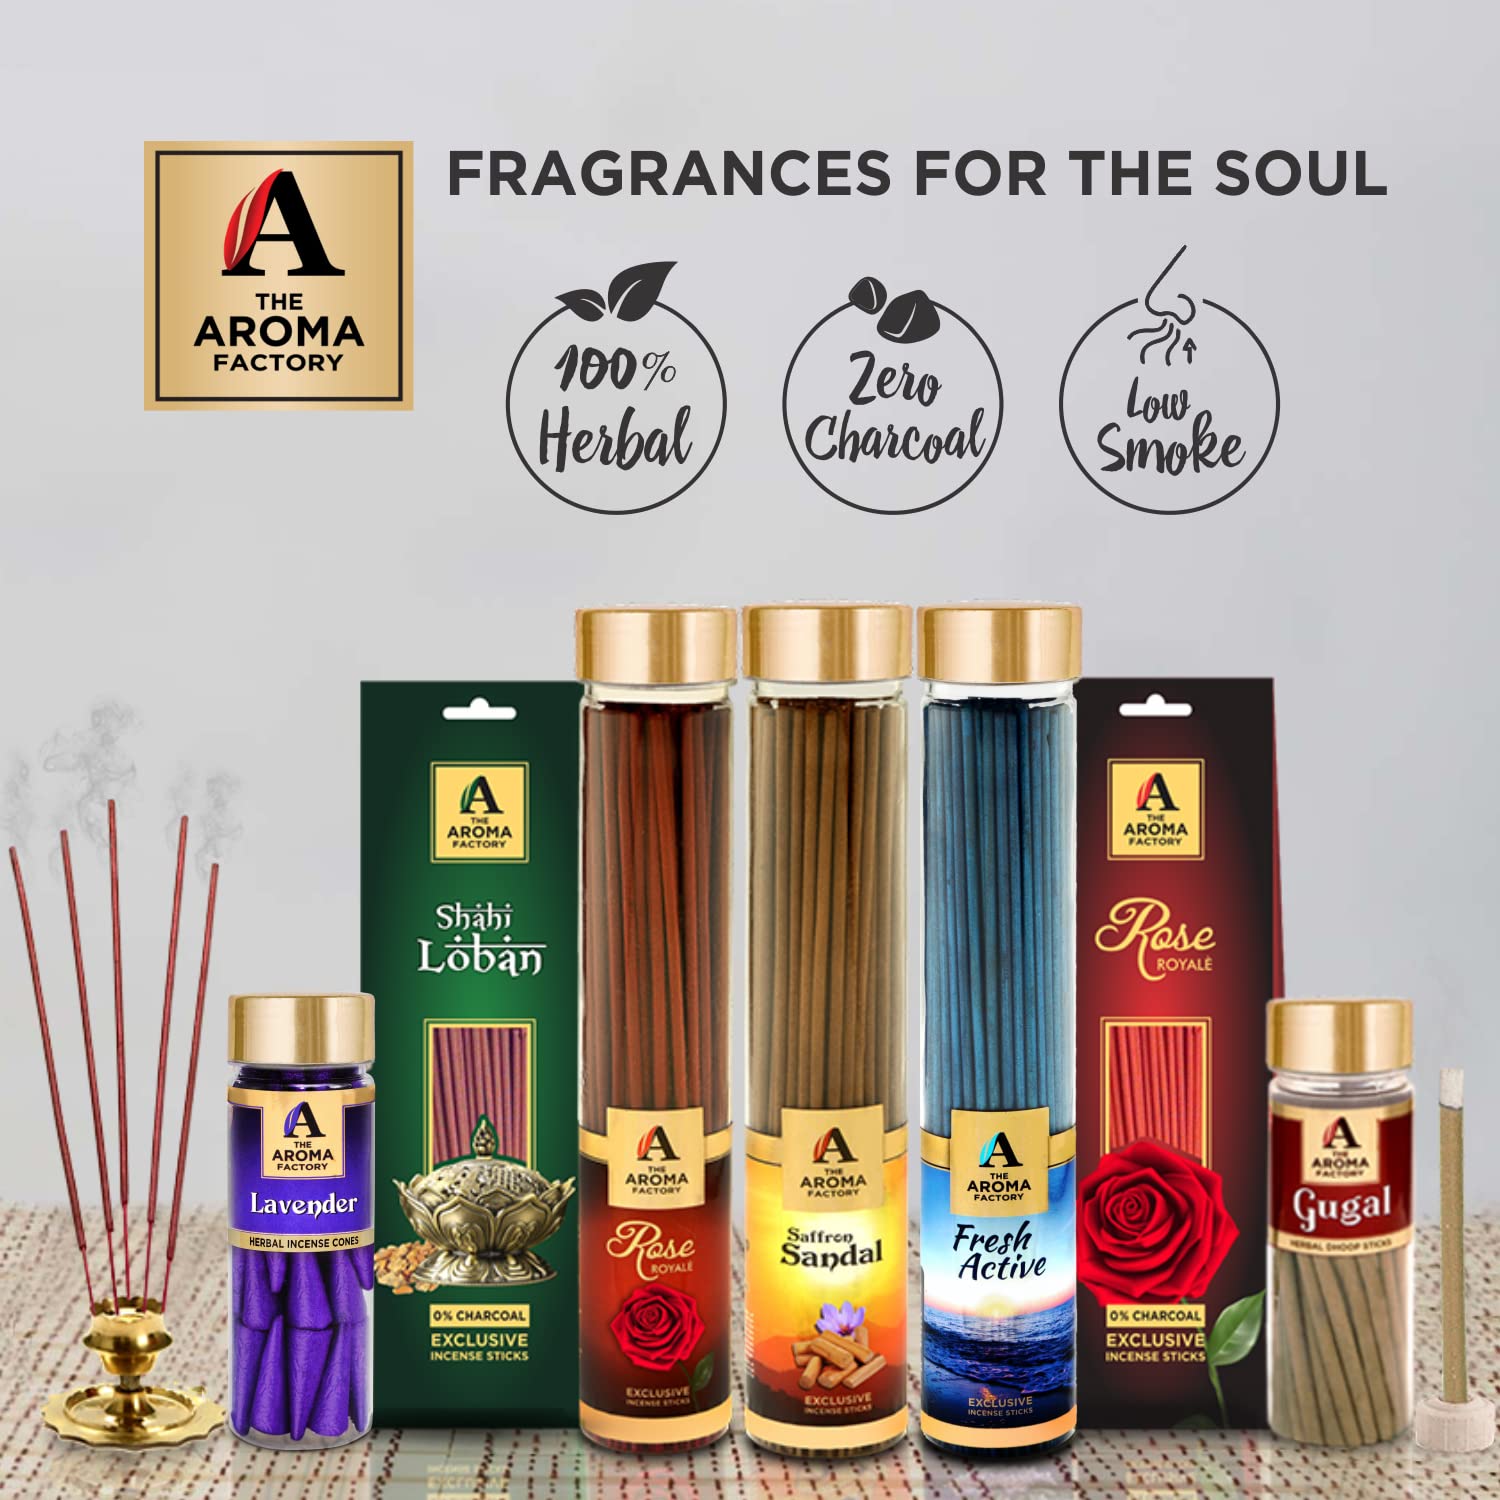 The Aroma Factory Happy Children's Day Gift Hamper Set (Swad Mix 25 Candy, Incense Pineapple 30 Sticks Agarbatti Packet, Swad Coloured Saunf Bottle, Greeting Card, Jute Bag) Gift Item